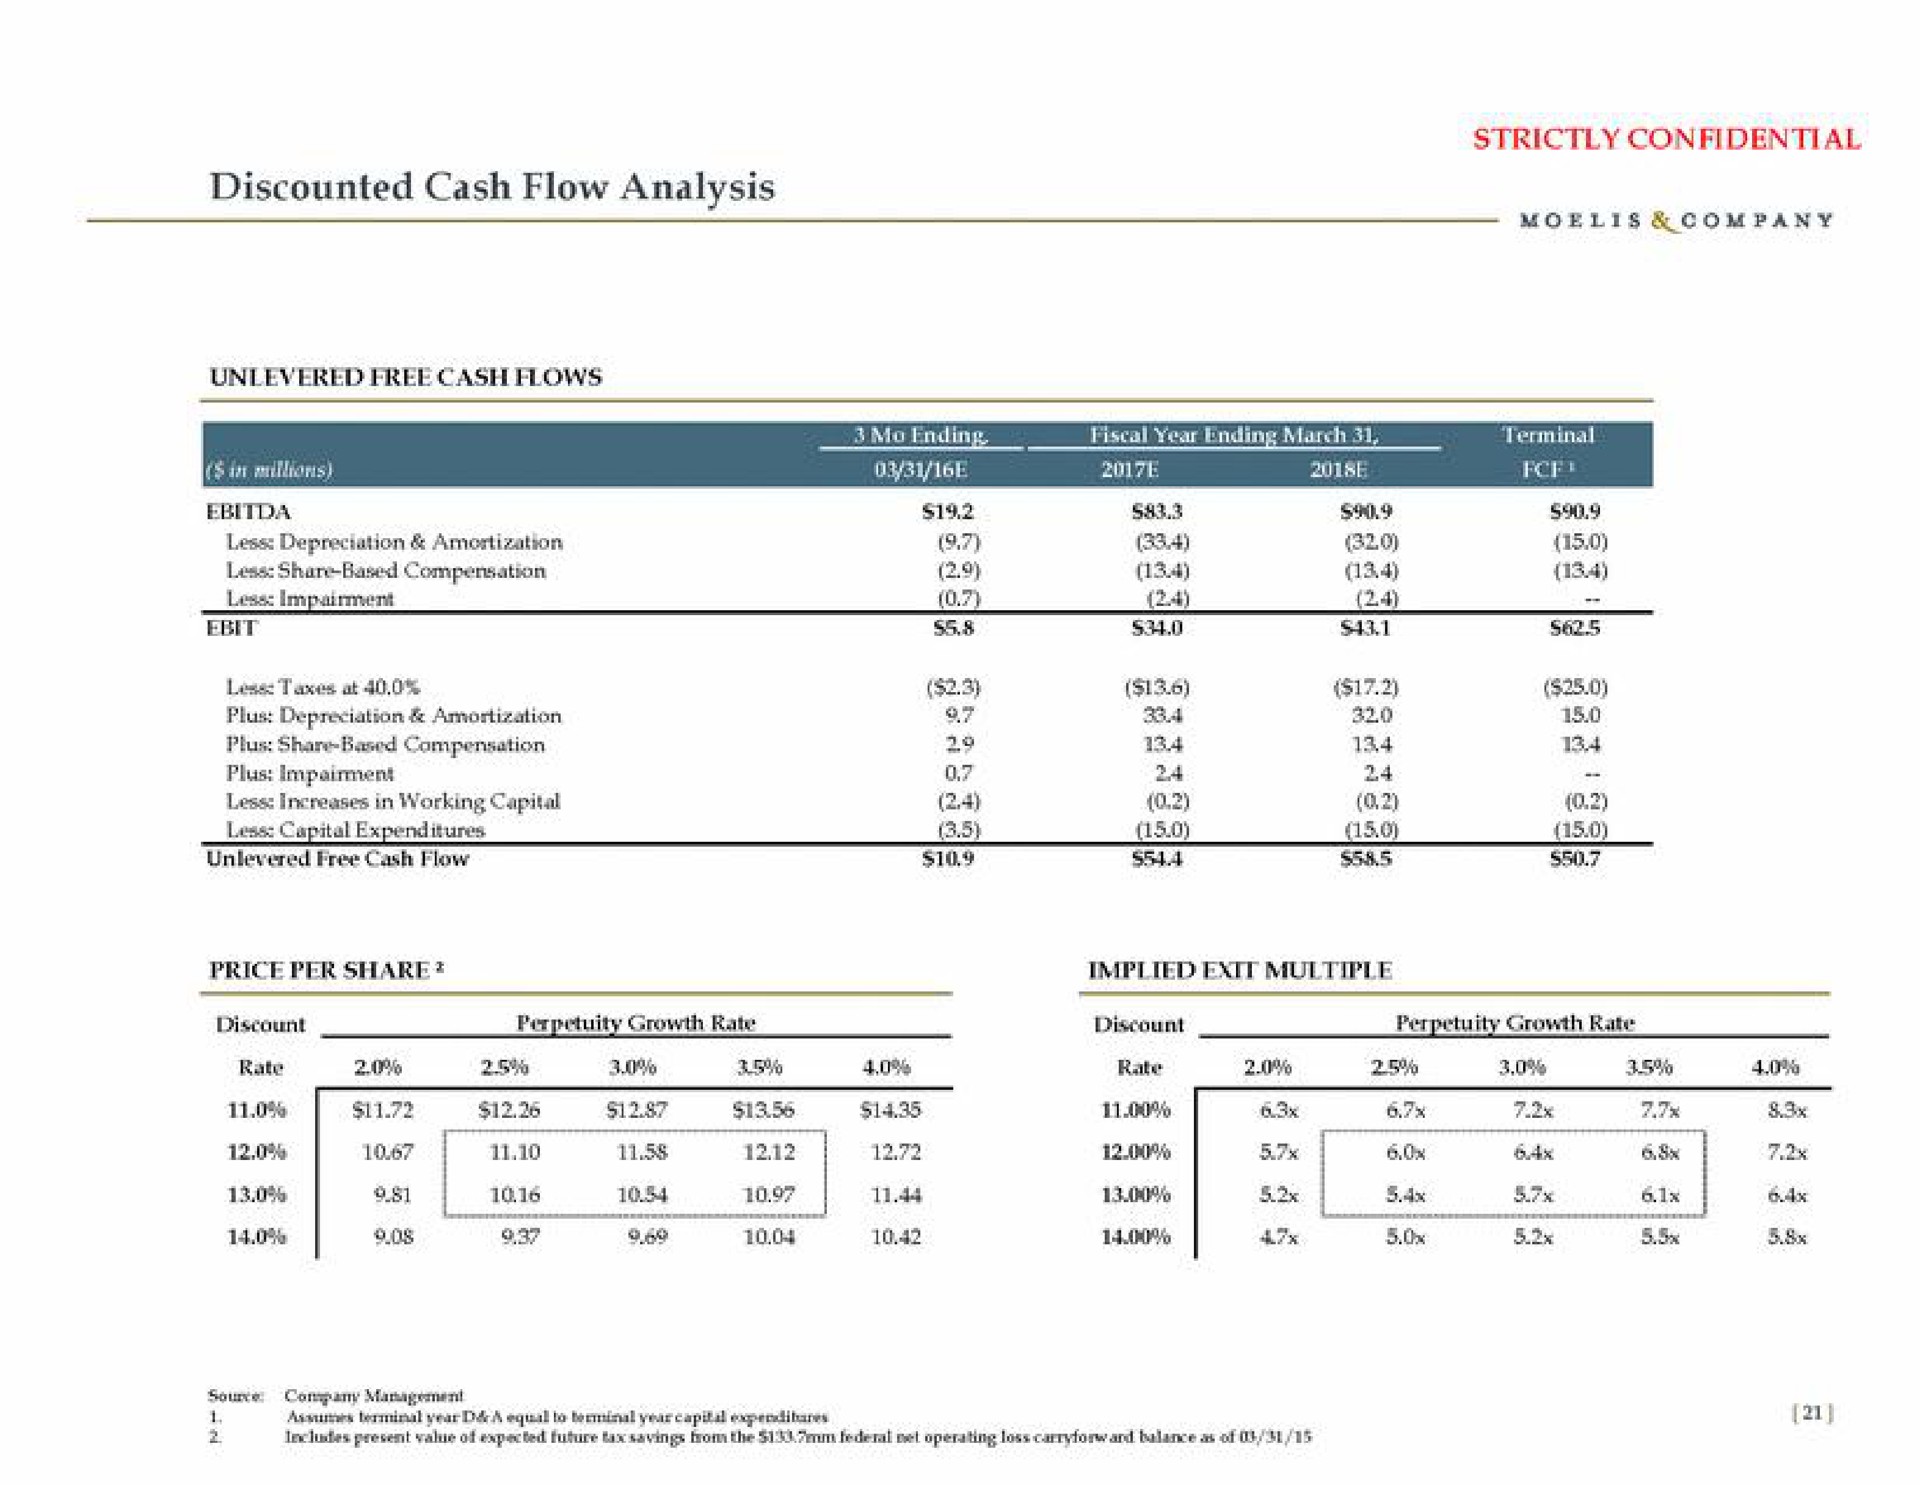 discounted cash flow analysis | Moelis & Company